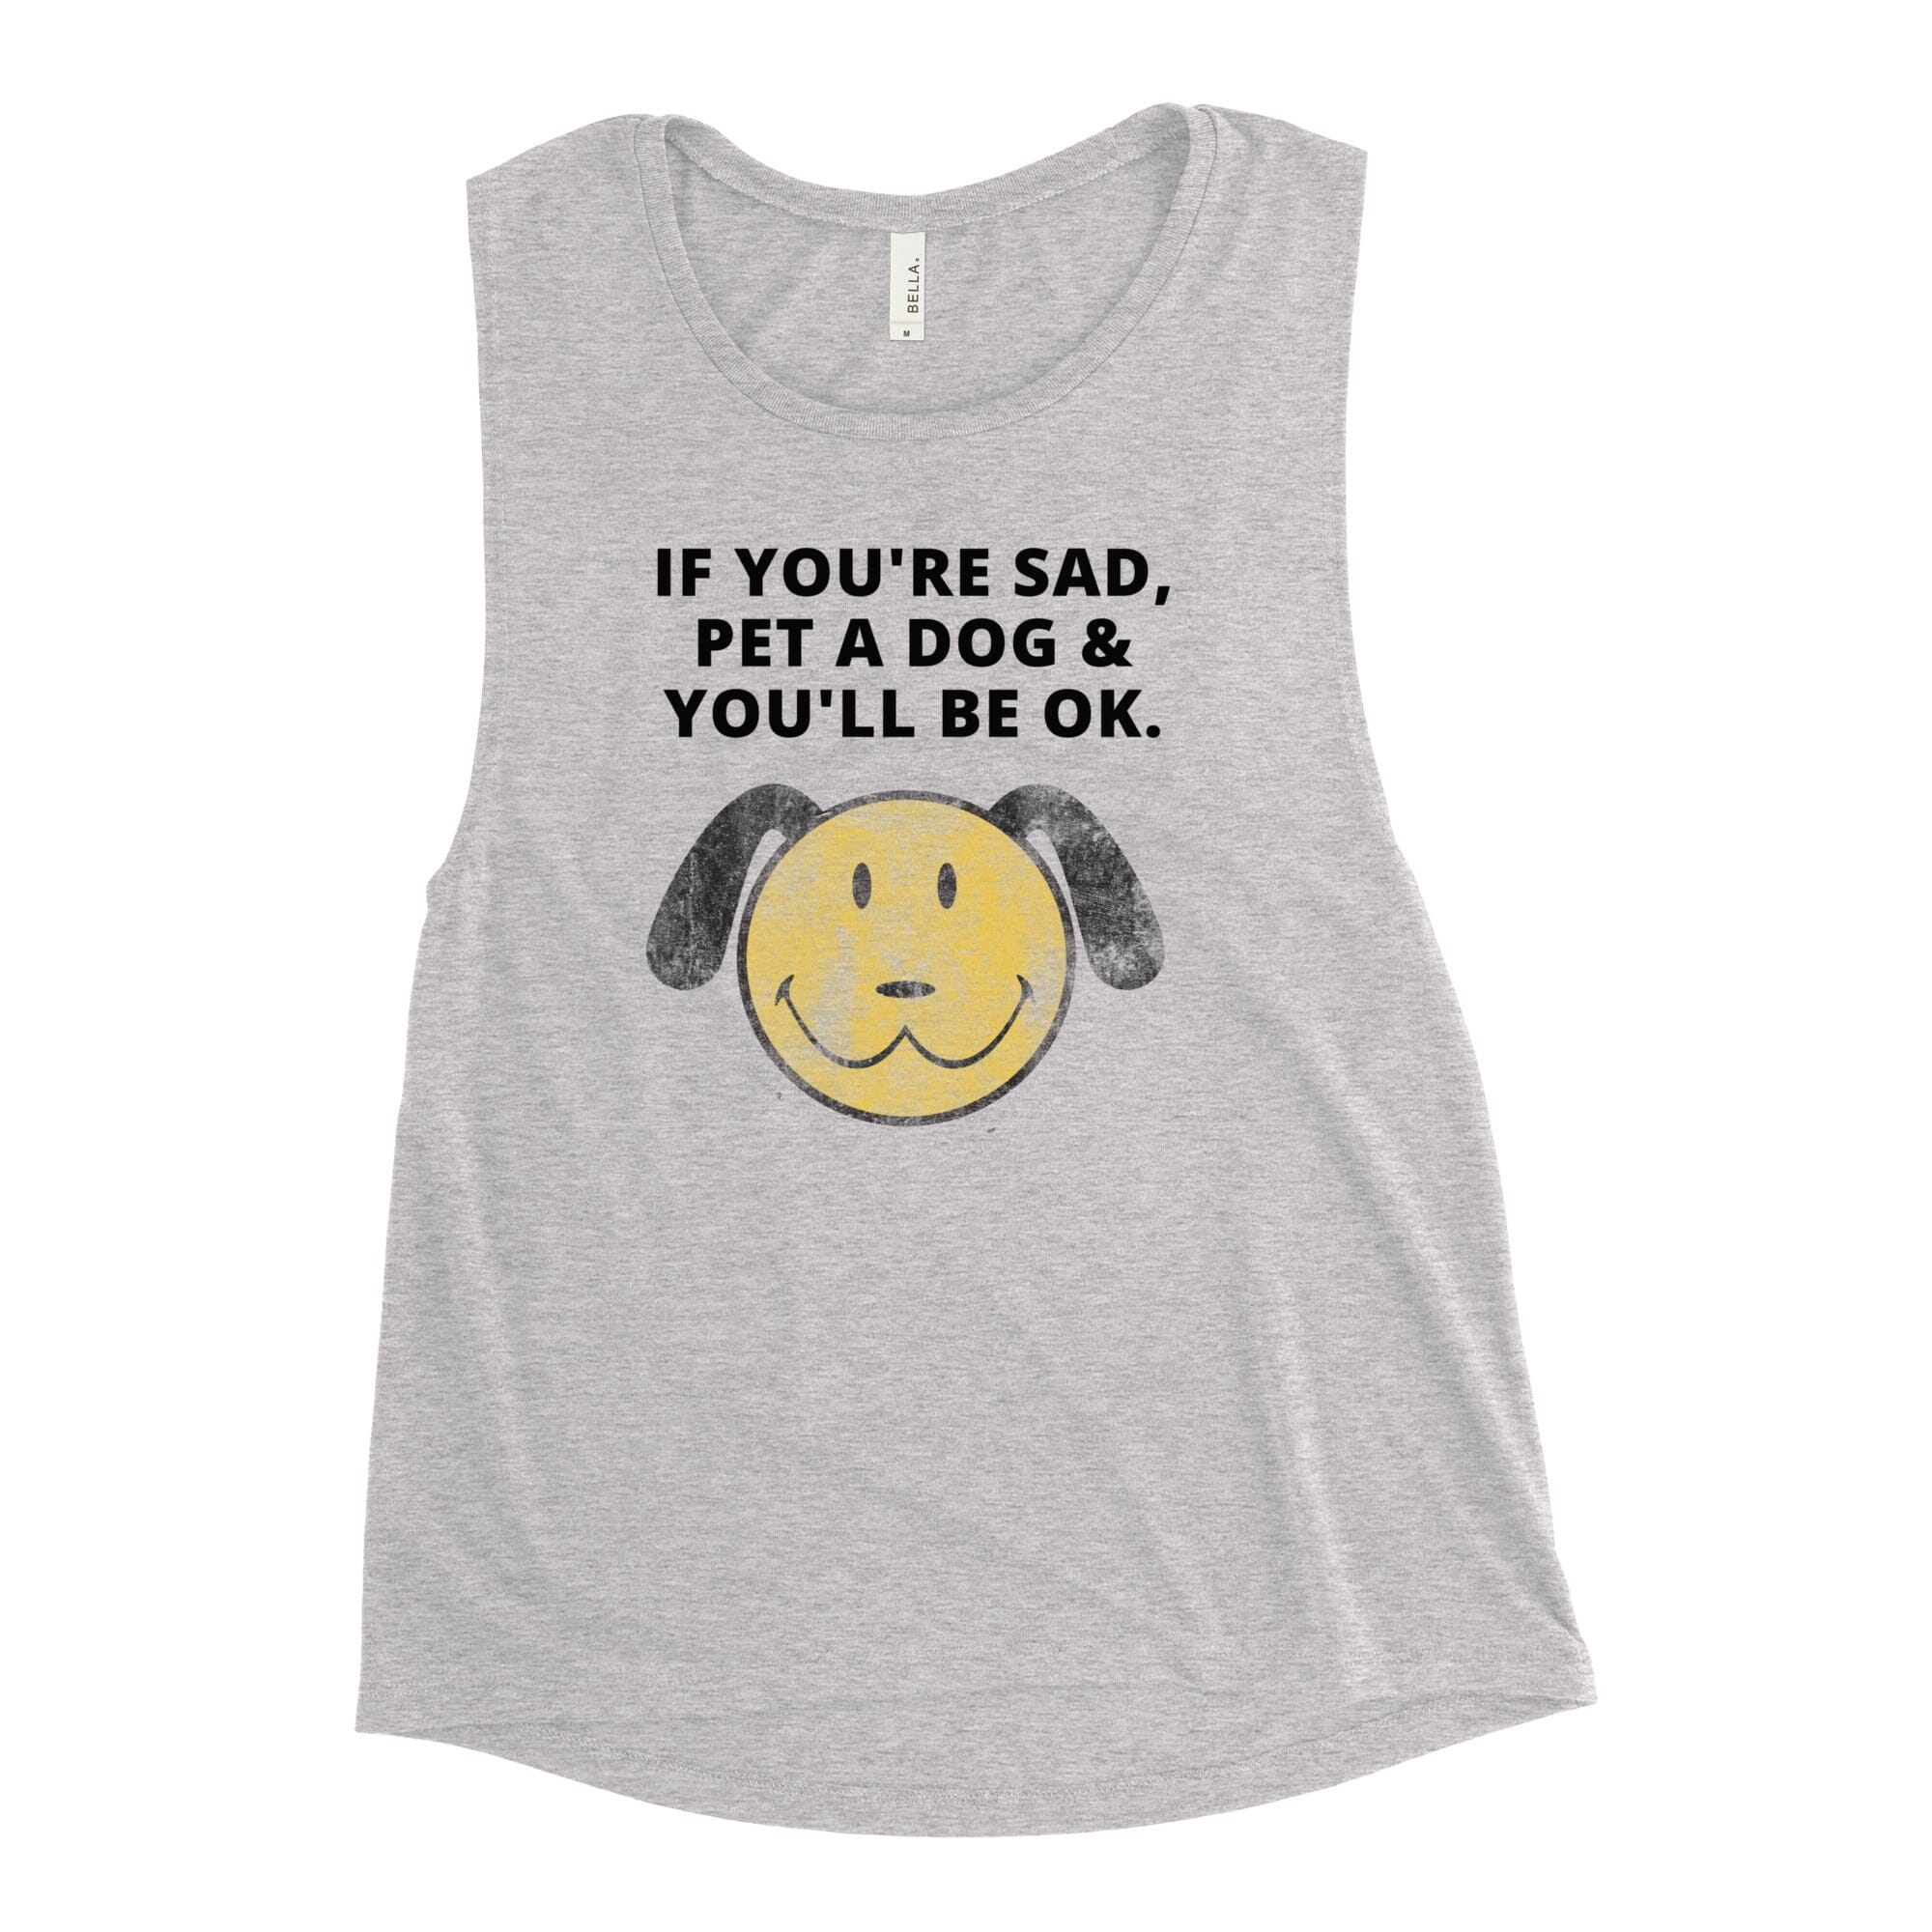 Pet A Dog (Ladies Muscle Tank)